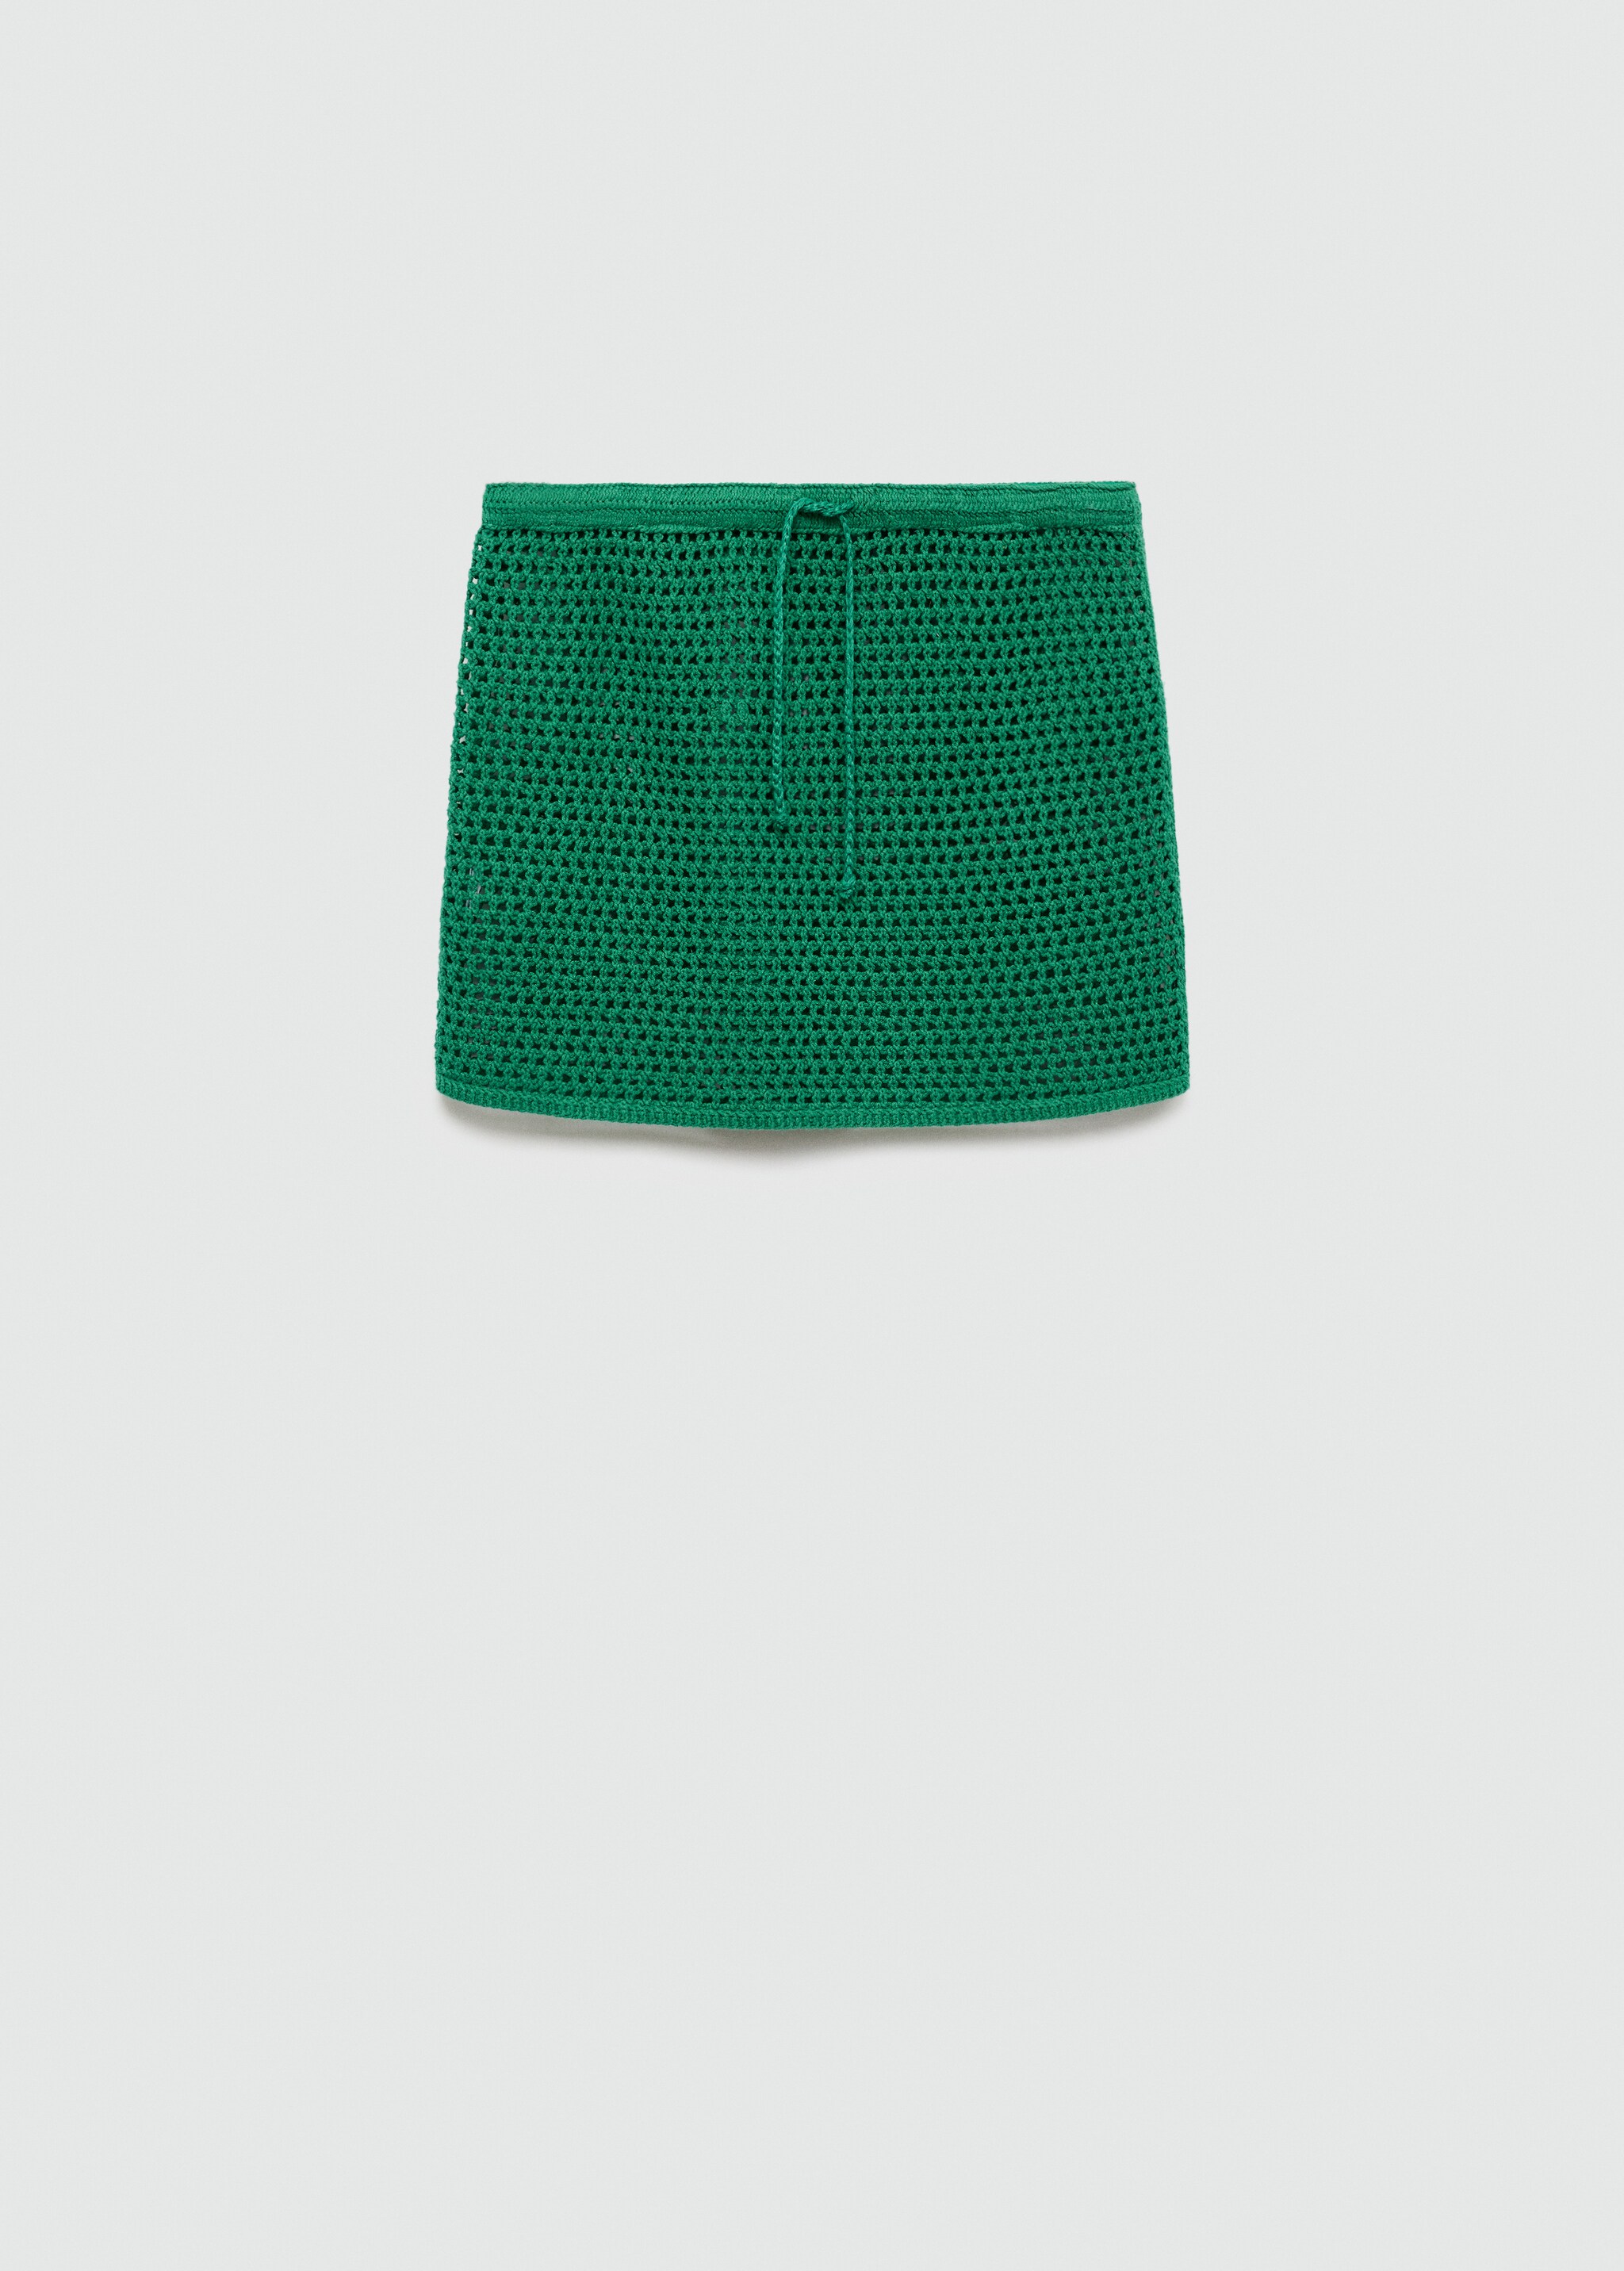 Crochet mini skirt - Article without model